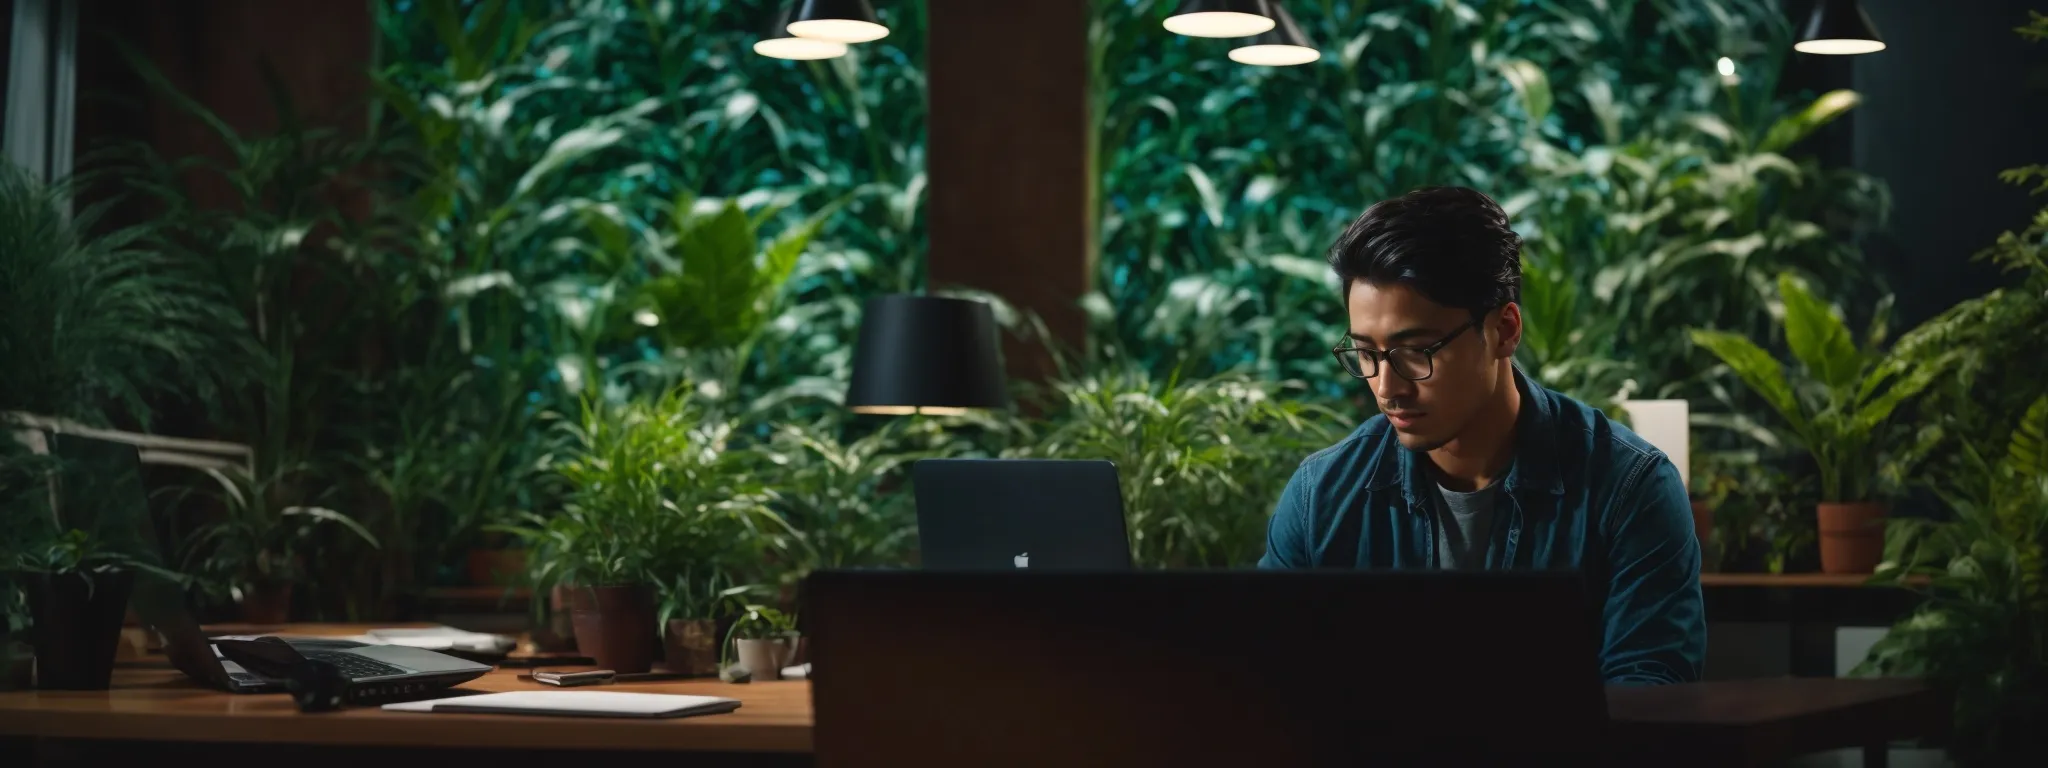 a focused individual sits at a modern workspace, intently composing a promotional email on a sleek computer amidst a backdrop of vibrant plant life, symbolizing the growth potential of email marketing.